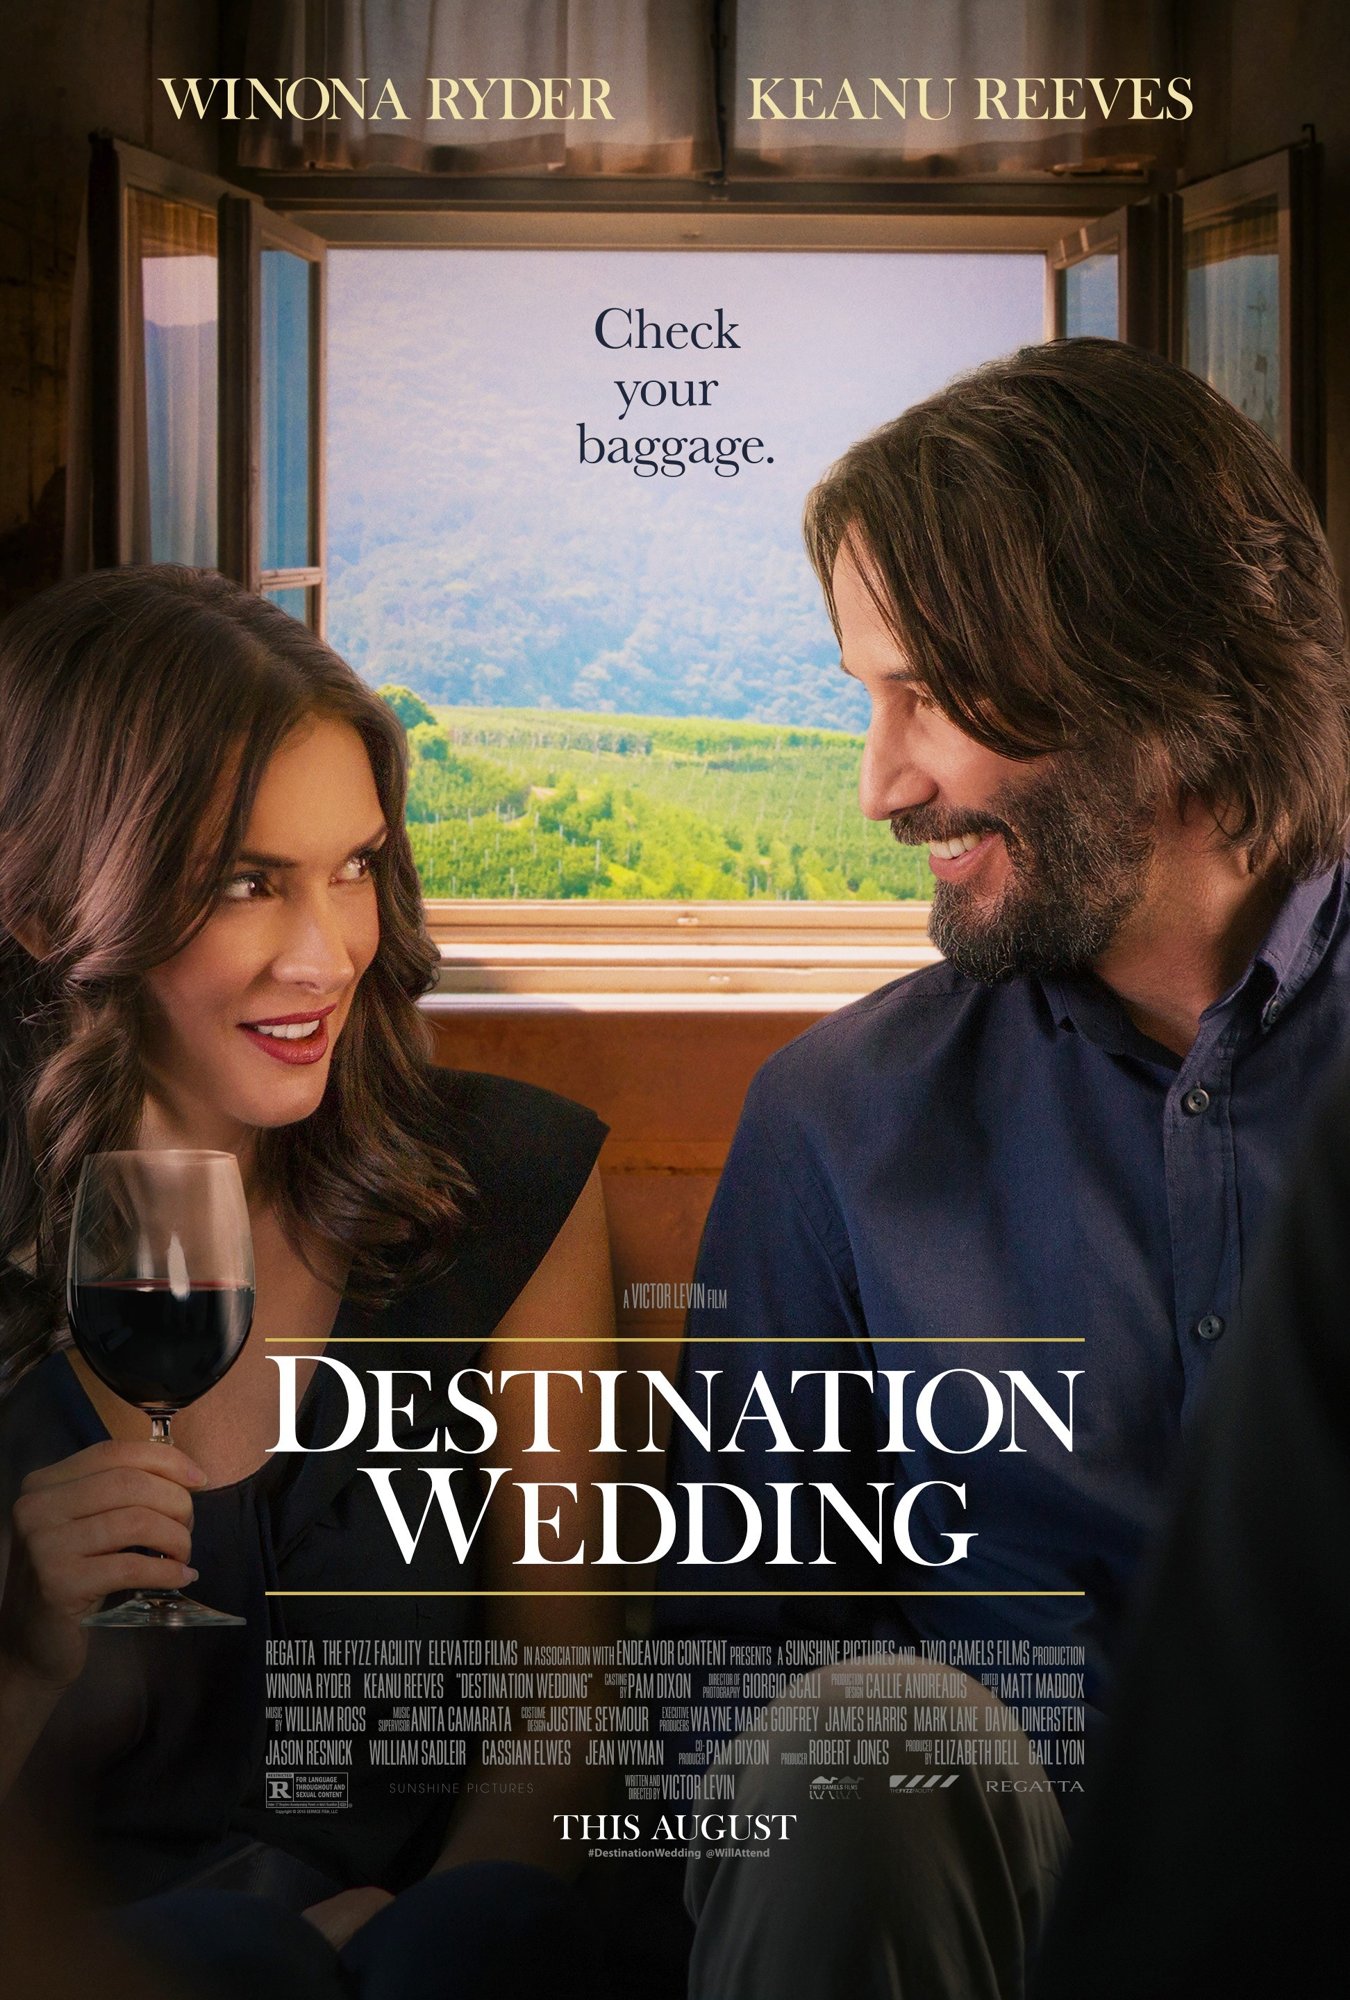 Destination Wedding (2018) Pictures, Trailer, Reviews, News, DVD and Soundtrack1350 x 2000